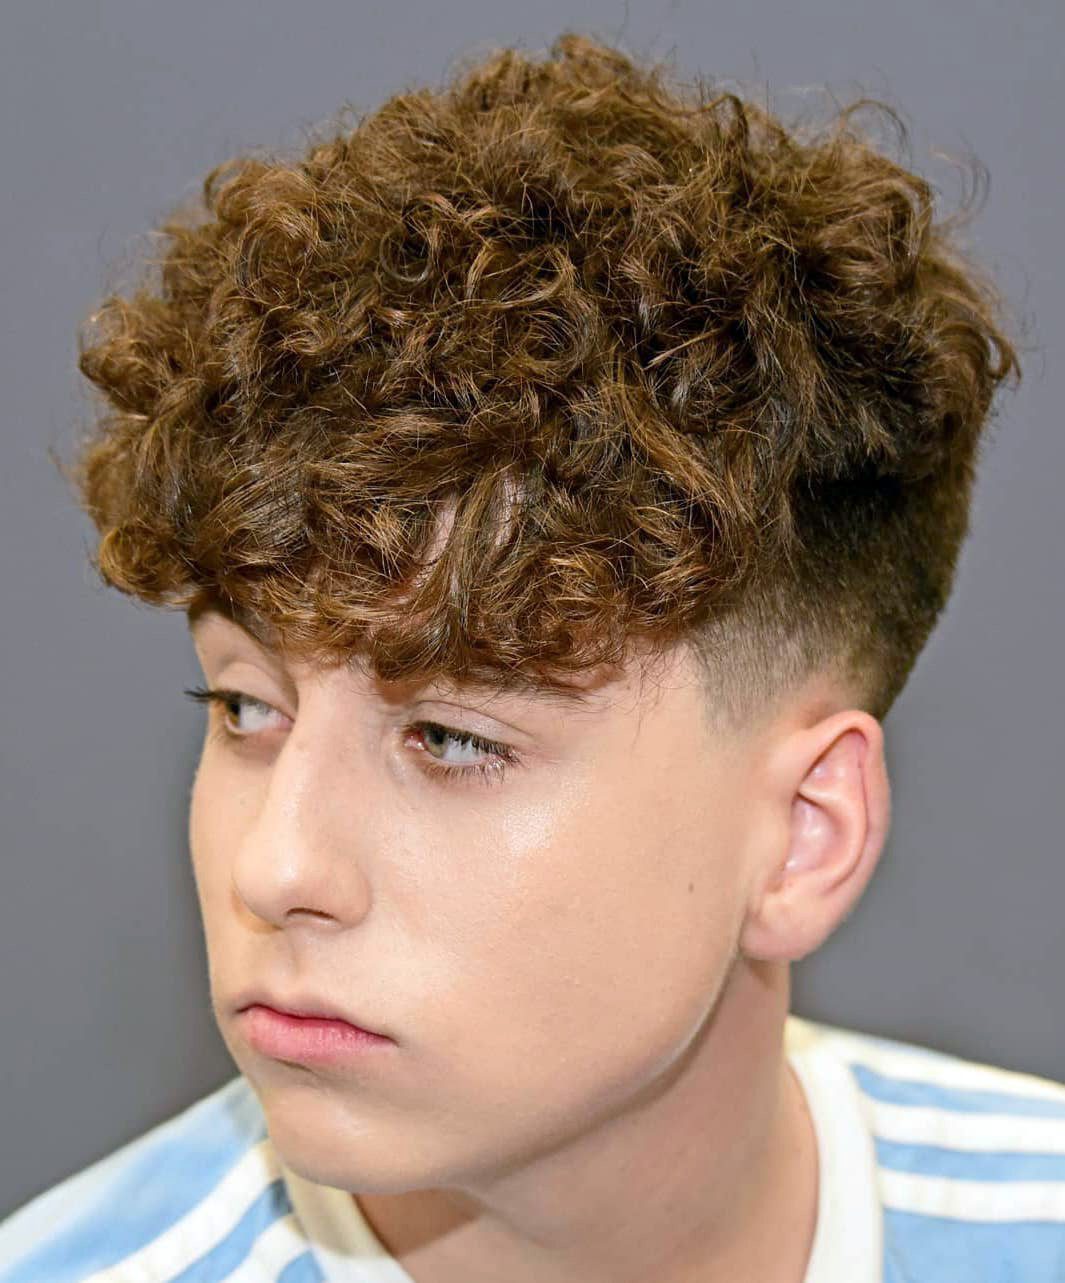 Messy Curly Fringes with Undercut Fade